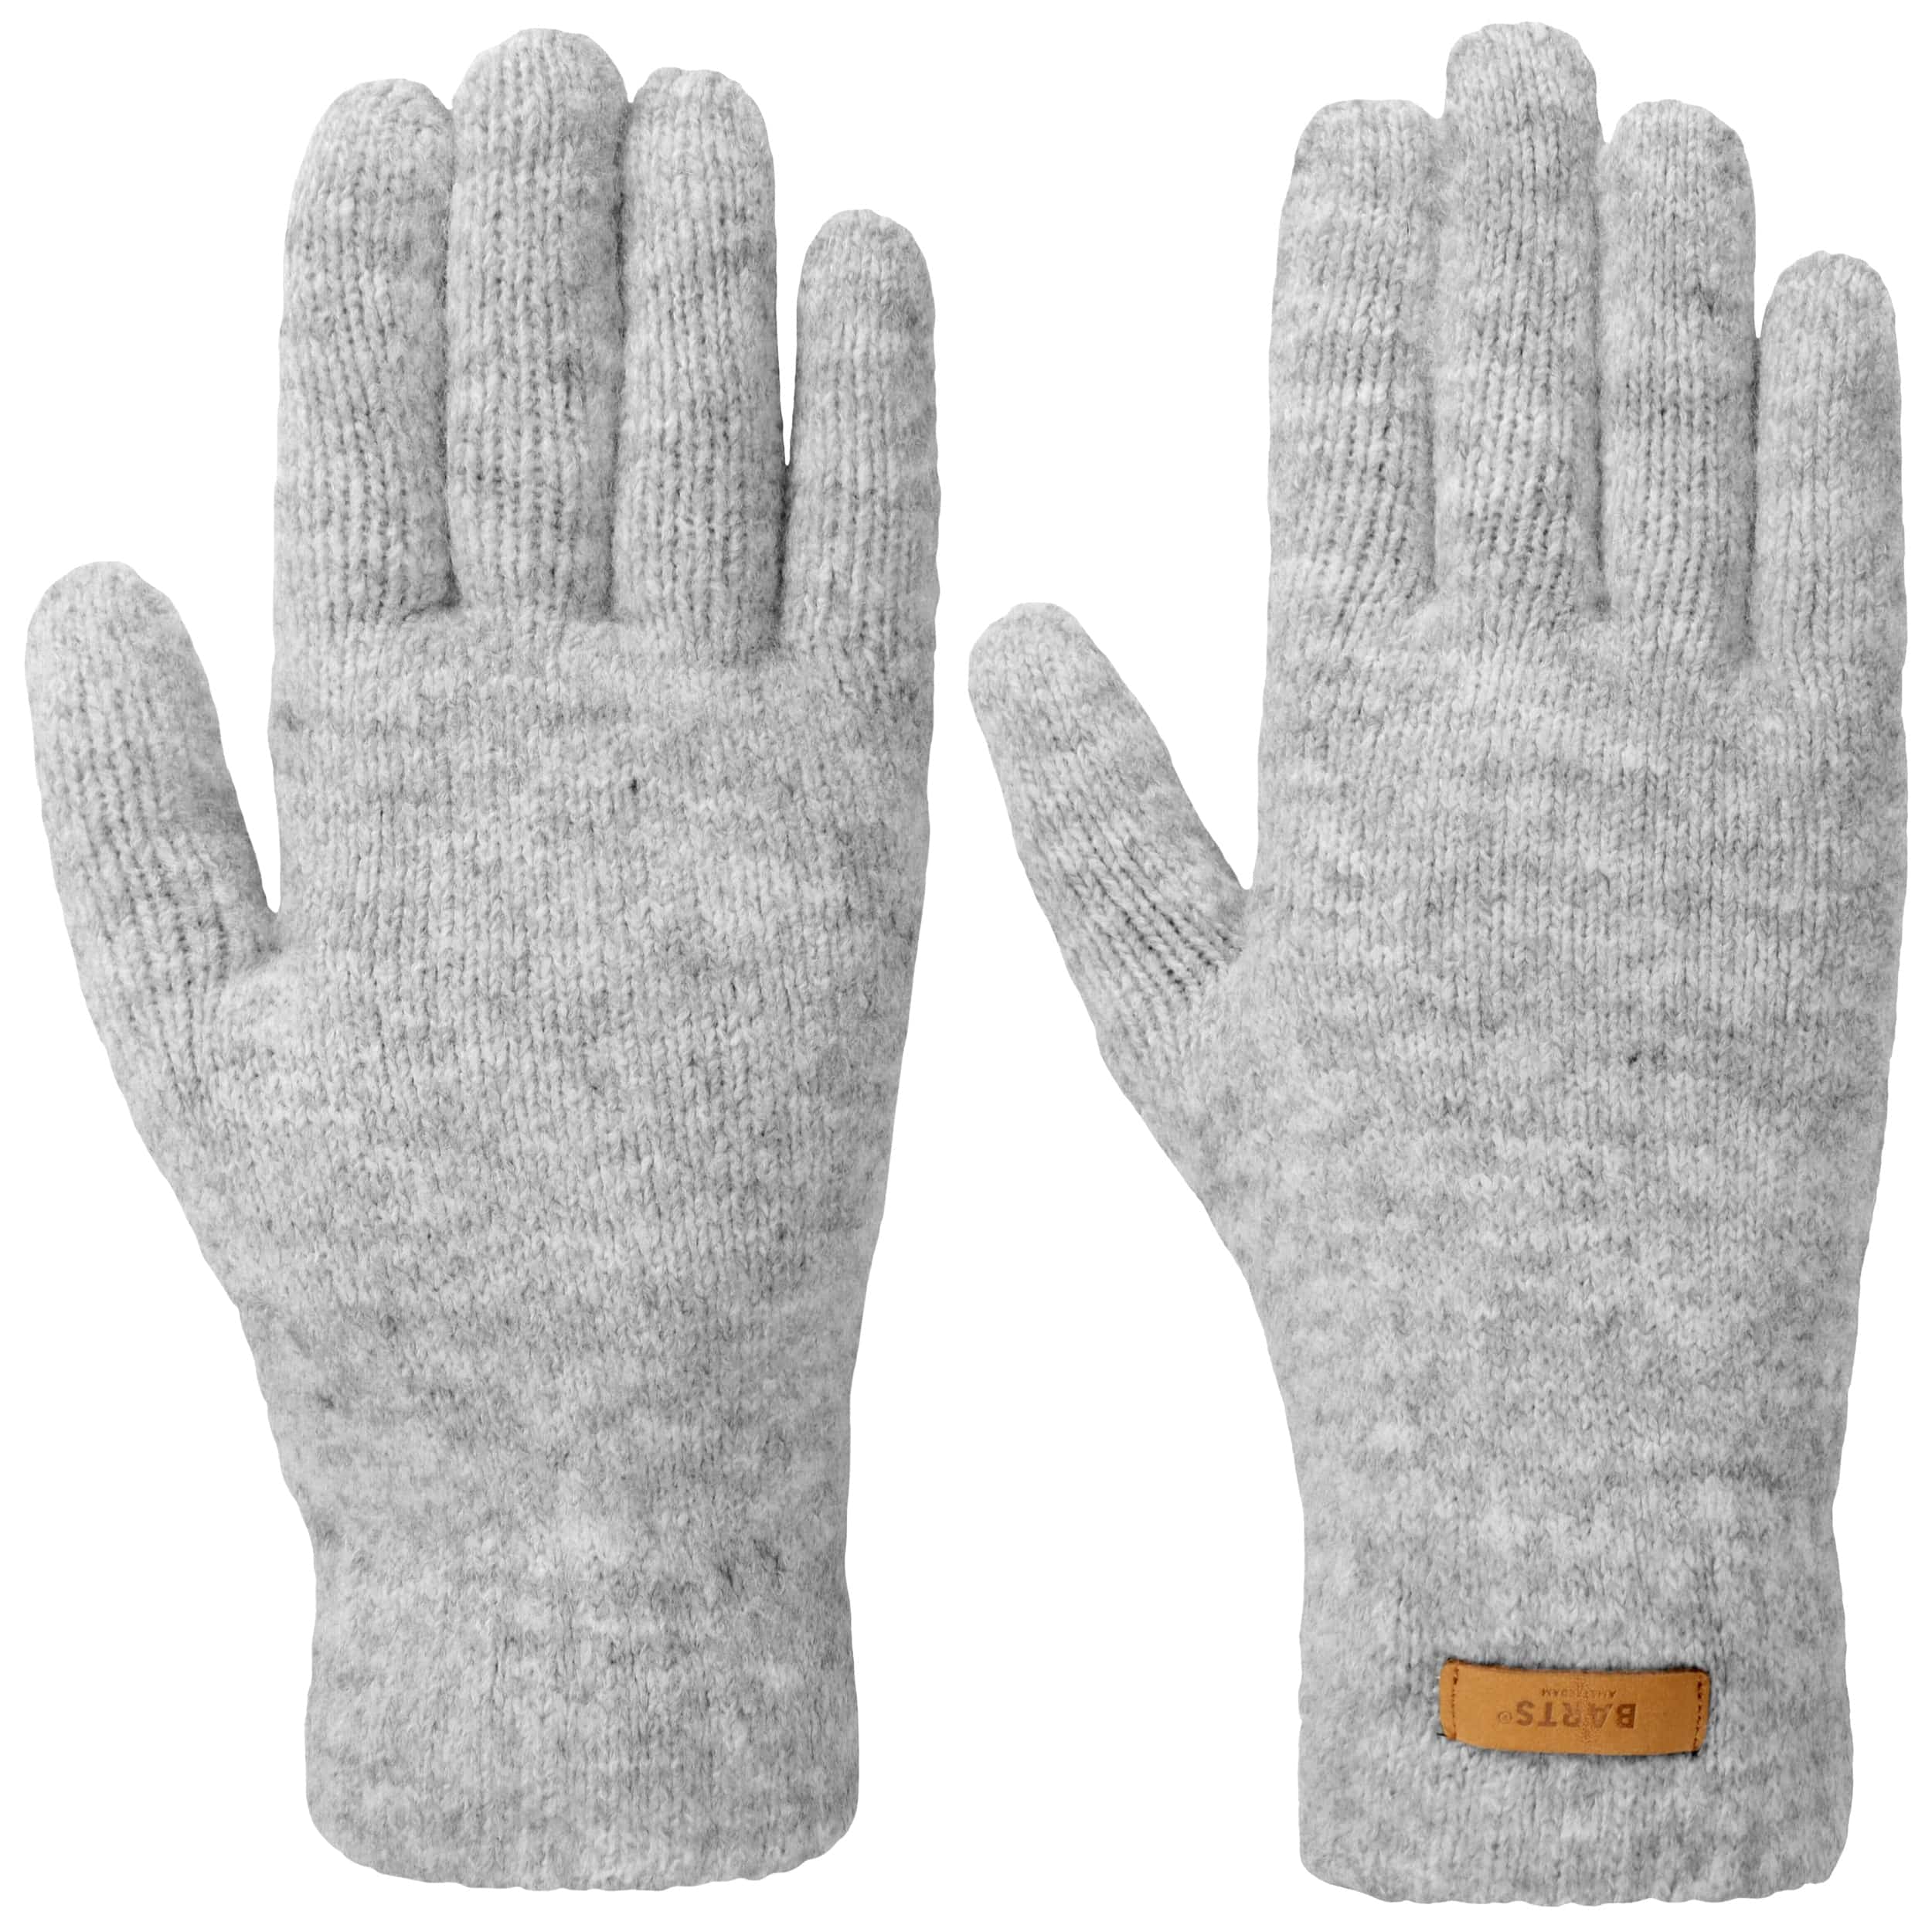 Witzia Gloves with Teddy Lining by Barts - 26,95 €